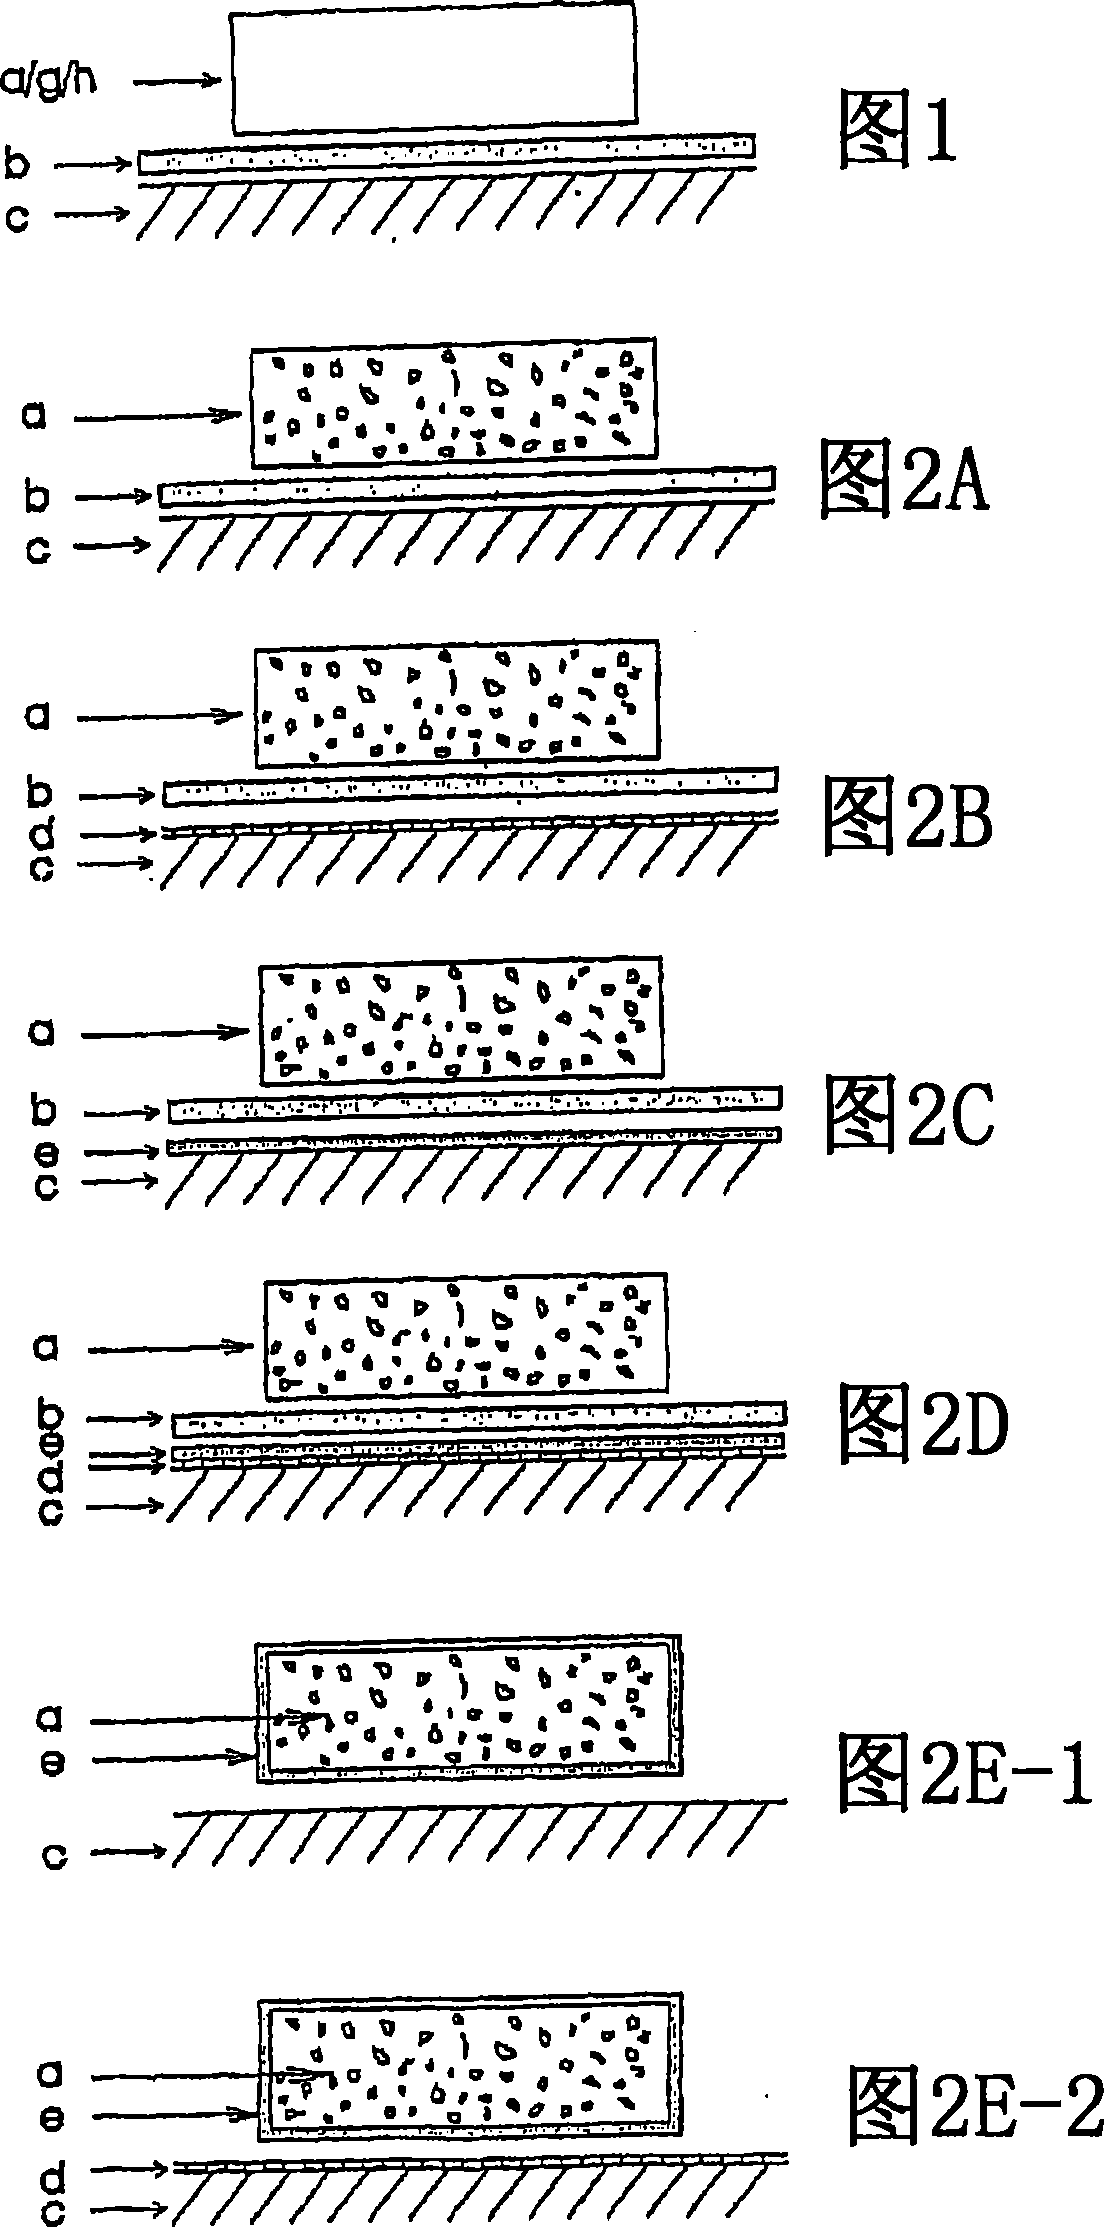 Method of producing metal to glass, metal to metal or metal to ceramic connections